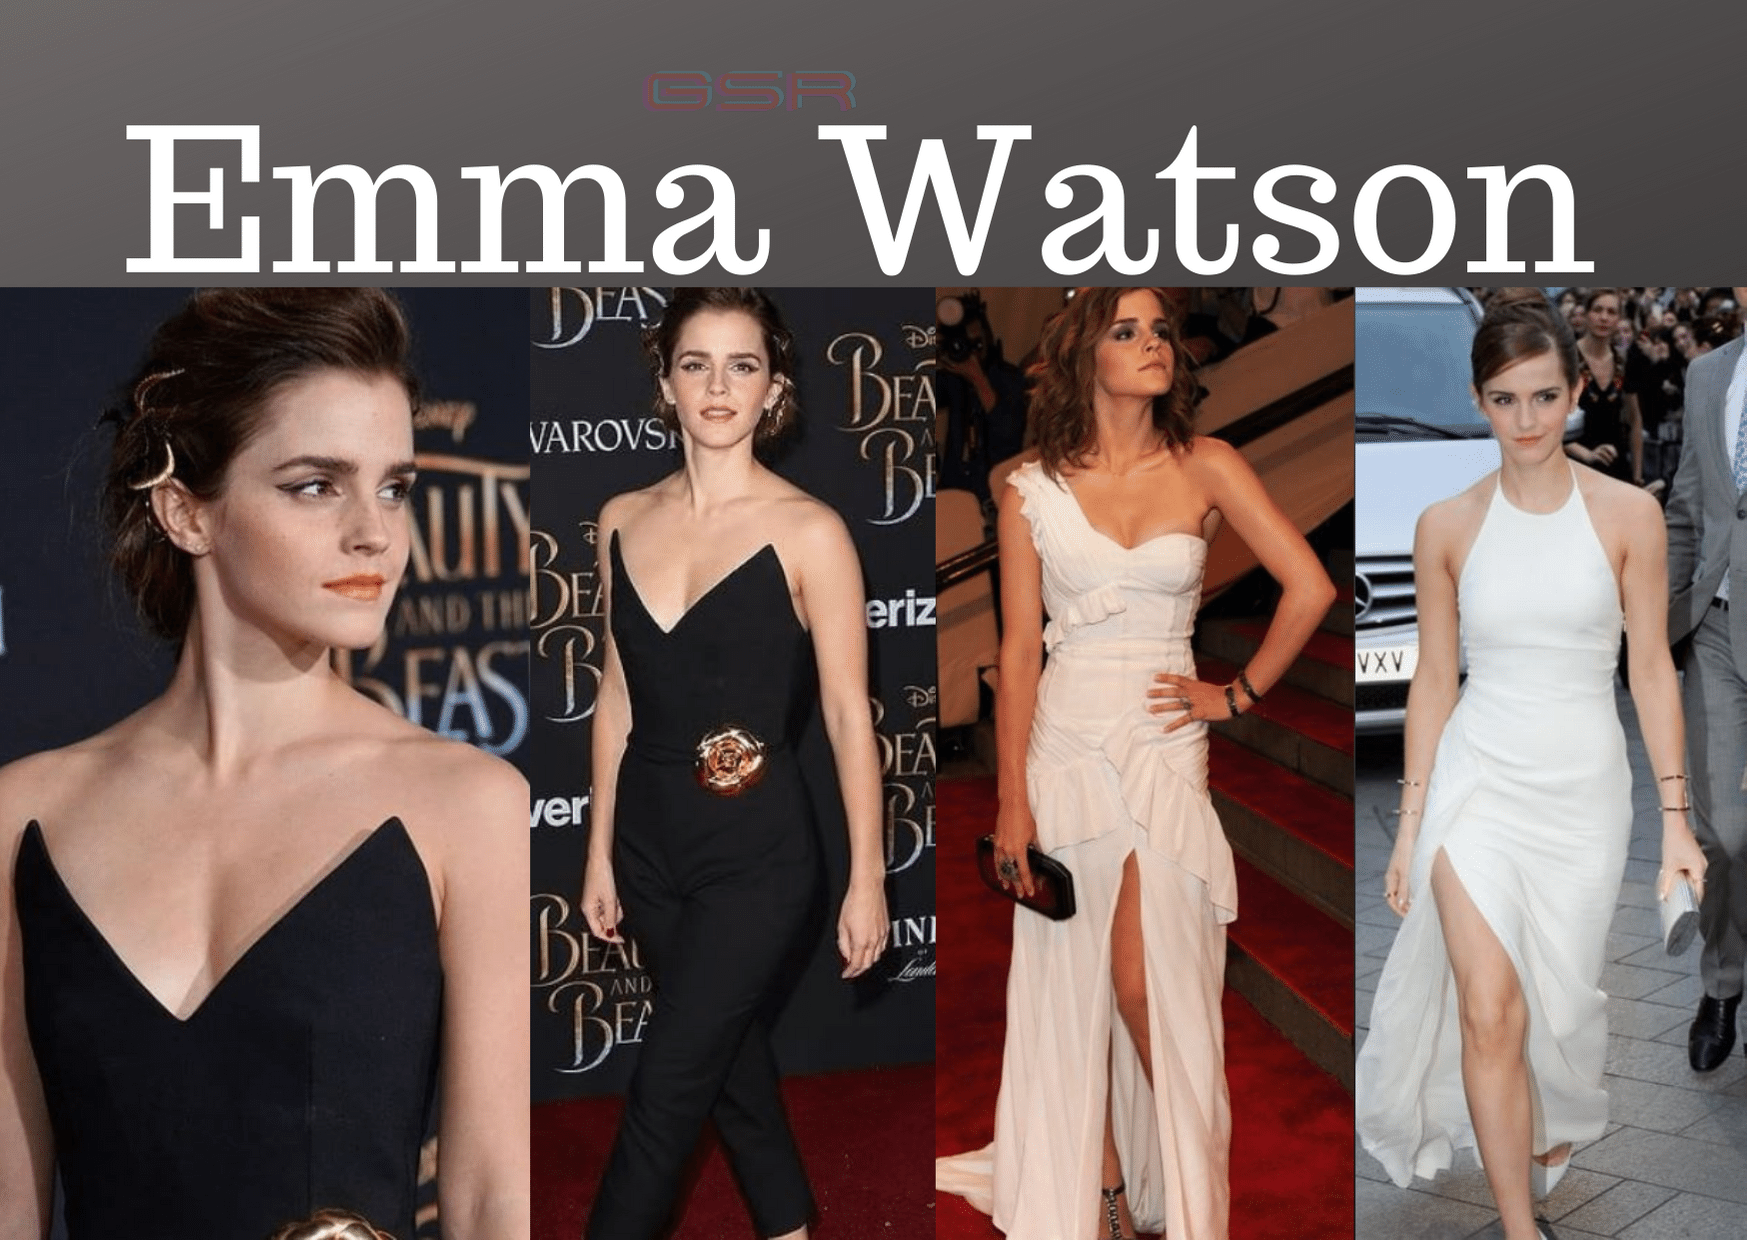 Emma Watson - Movies - Education - Instagram Emma Watson - Movies - Education - Instagram Paris Queen Emma Charlotte Durre Watson an English actress, model, and activist. Watson's first professional acting role in the film series Harry Potter as Hermione Granger in 2011. Emma Watson was born on 15 April 1990 in Paris, France. When she was young her parents divorced and she lives with her mother in England. On weekends she spends her time with her father in London. At the age of six, she wants to be an actress, and she started training at the Oxford branch of Stagecoach Theatre Arts. Education After moving to London with her mother and brother, Watson attends Dragon School till 2003. At age of 6, she started training at the part-time theatre school where she learns singing, dancing, and acting. After leaving Dragon School she moved to Headington School, Oxford. She achieves eight A* and two A grades in 10 subjects of GCSE examination. Doing the movie Harry Potter and the Deathly Hallows in 2009 she took a gap year after leaving school. She takes a bachelor's degree in English Literature from Brown University on 25 May 2014. Movie 2001 - Harry Potter and the Philosopher's Stone - Hermione Granger 2002 - Harry Potter and the Chamber of Secrets - Hermione Granger 2004 - Harry Potter and the Prisoner of Azkaban - Hermione Granger 2005 - Harry Potter and the Goblet of Fire - Hermione Granger 2007 - Harry Potter and the Order of the Phoenix - Hermione Granger 2008 - The Tale of Despereaux - Princess Pea 2009 - Harry Potter and the Half-Blood Prince - Hermione Granger 2010 - Harry Potter and the Deathly Hallows – Part 1 - Hermione Granger 2011 - Harry Potter and the Deathly Hallows – Part 2 - Hermione Granger 2011 - My Week with Marilyn - Lucy 2012 - The Perks of Being a Wallflower - Sam 2013 - The Bling Ring - Nicki Moore 2013 - This Is the End - Herself 2014 - Noah - Ila 2015 - Colonia - Lena 2015 - Regression - Angela Gray 2017 - Beauty and the Beast - Belle 2017 - The Circle - Mae Holland 2019 - Little Women - Margaret "Meg" March Instagram View this post on Instagram #Repost @calvinklein with @repostapp. ・・・ At the #metgala, actor + activist @emmawatson in a custom Calvin Klein Collection look designed in collaboration with @ecoage and made from sustainable cotton, satin, and taffeta woven from recycled plastic yarn. #mycalvins #manusxmachina A post shared by Emma Watson (@emmawatson) on May 2, 2016 at 6:34pm PDT